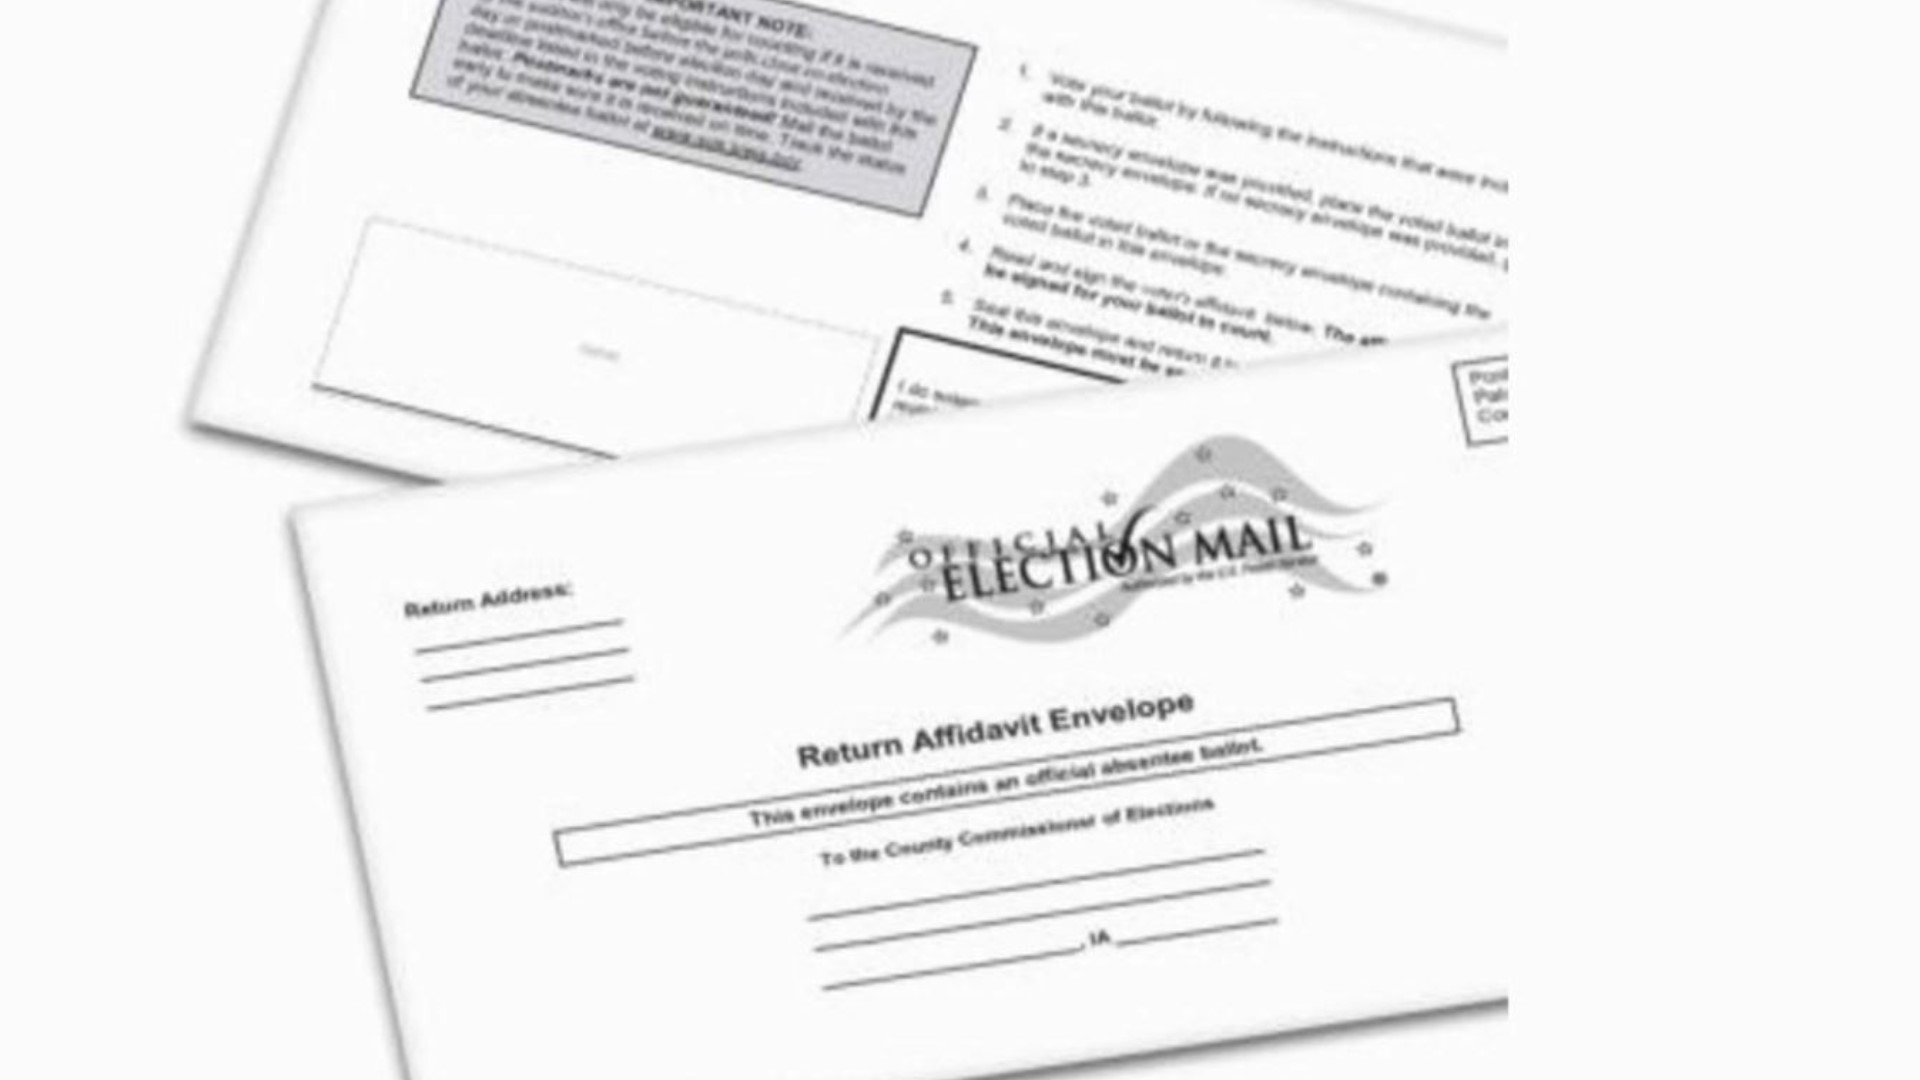 If you open your absentee ballot package, you'll see a secrecy envelope and affidavit envelope. Don't forget to sign the affidavit.